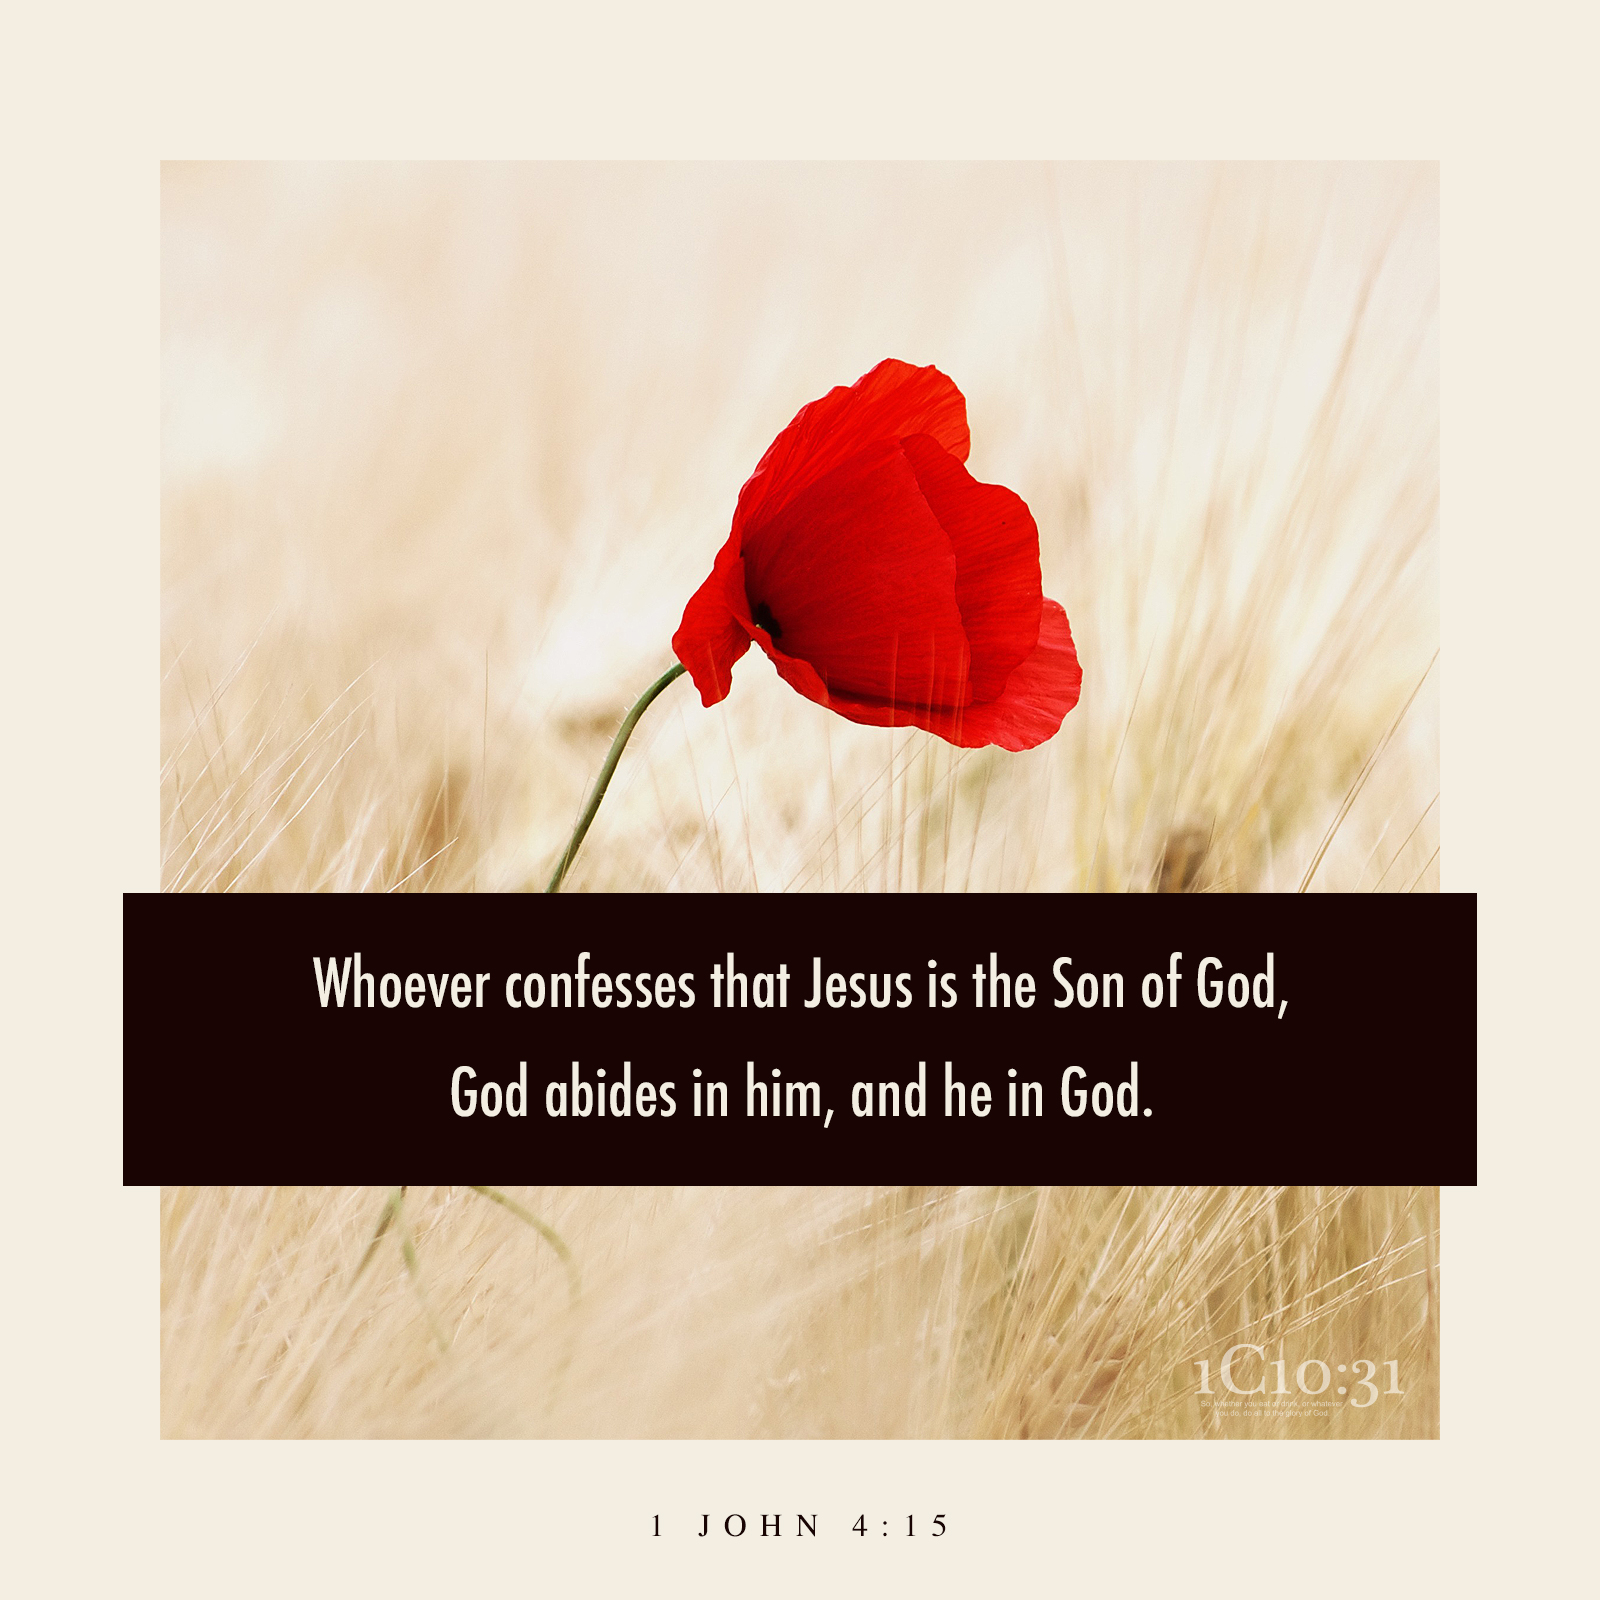 1 John 4:15 (NKJV) Whoever confesses that Jesus is the Son of God, God abides in him, and he in God.